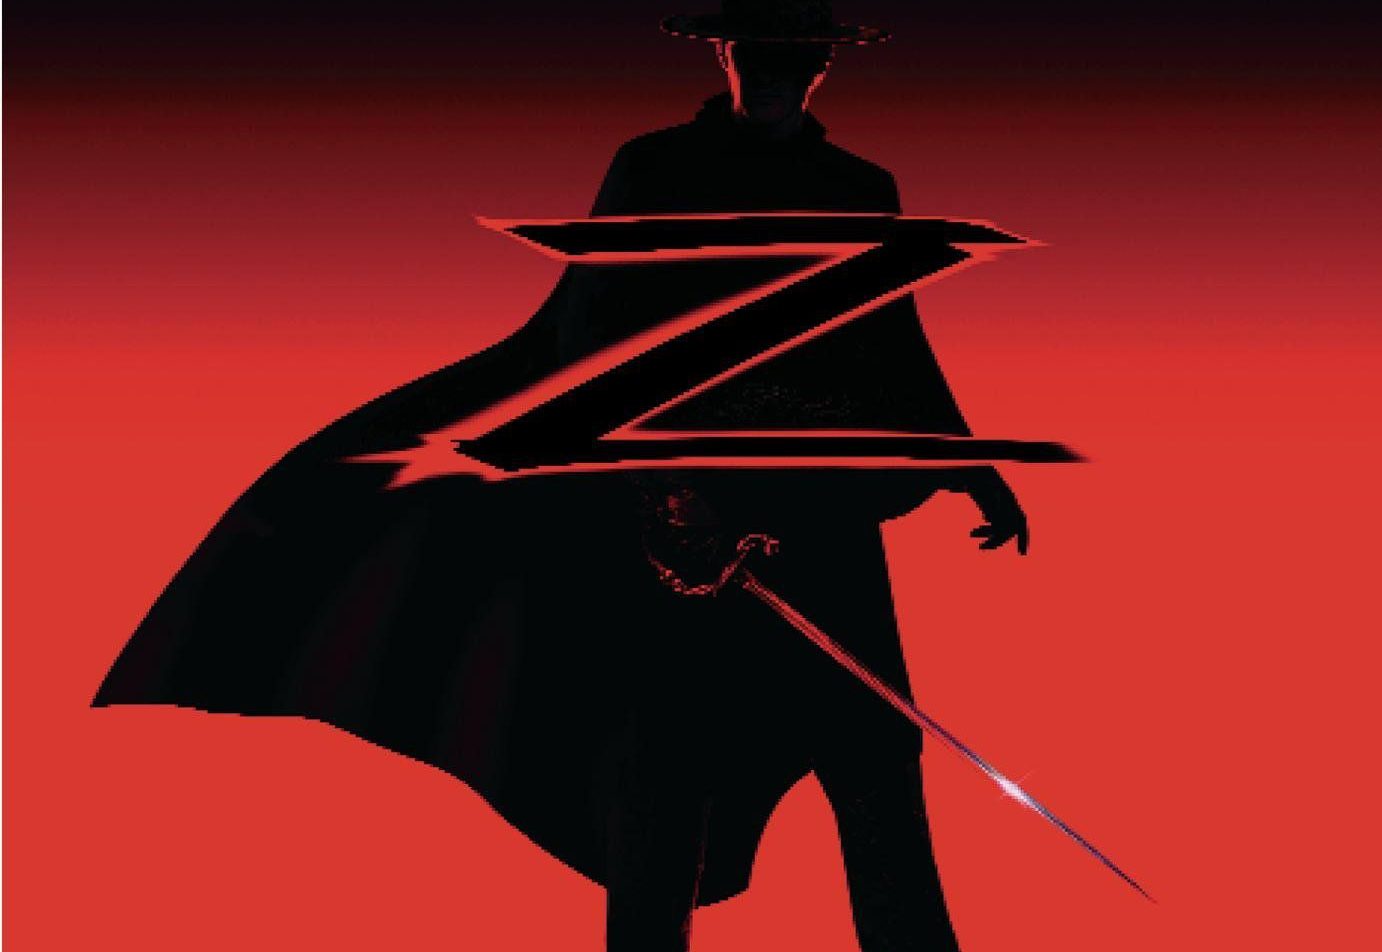 New 'Zorro' Will Be One For This Generation, Says Star Wilmer Valderrama